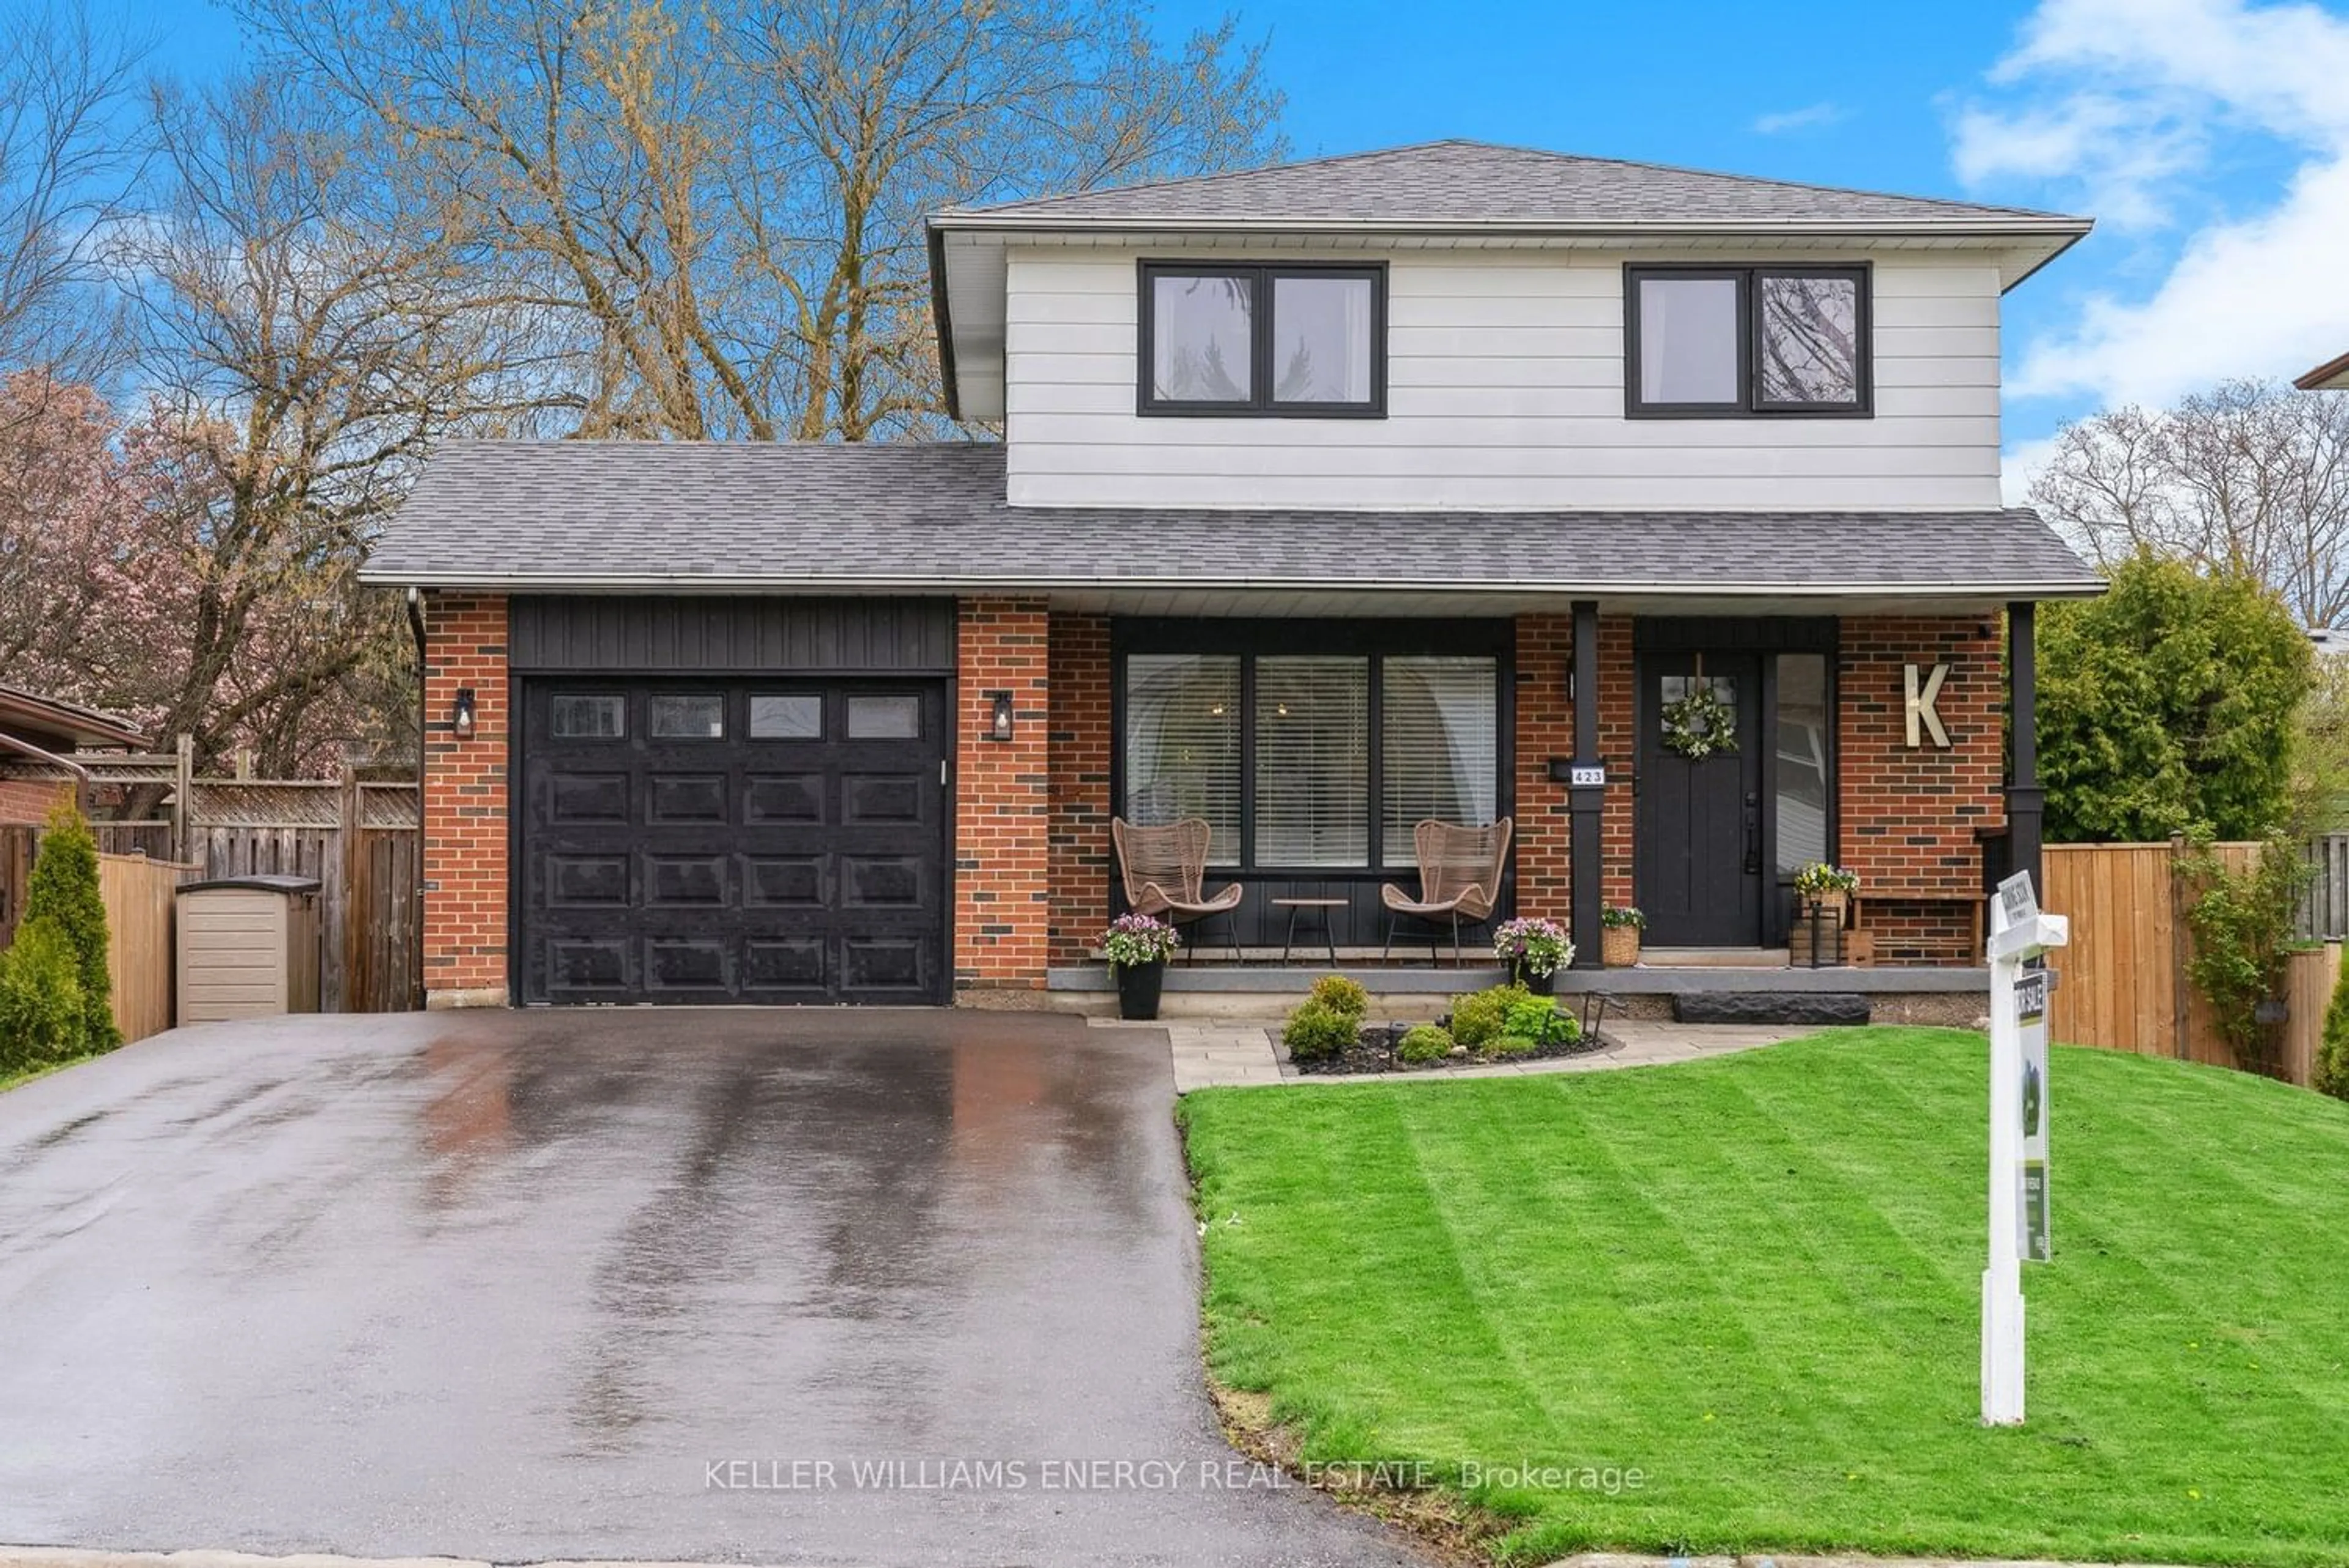 Home with brick exterior material for 423 Lanark Dr, Oshawa Ontario L1J 5W8